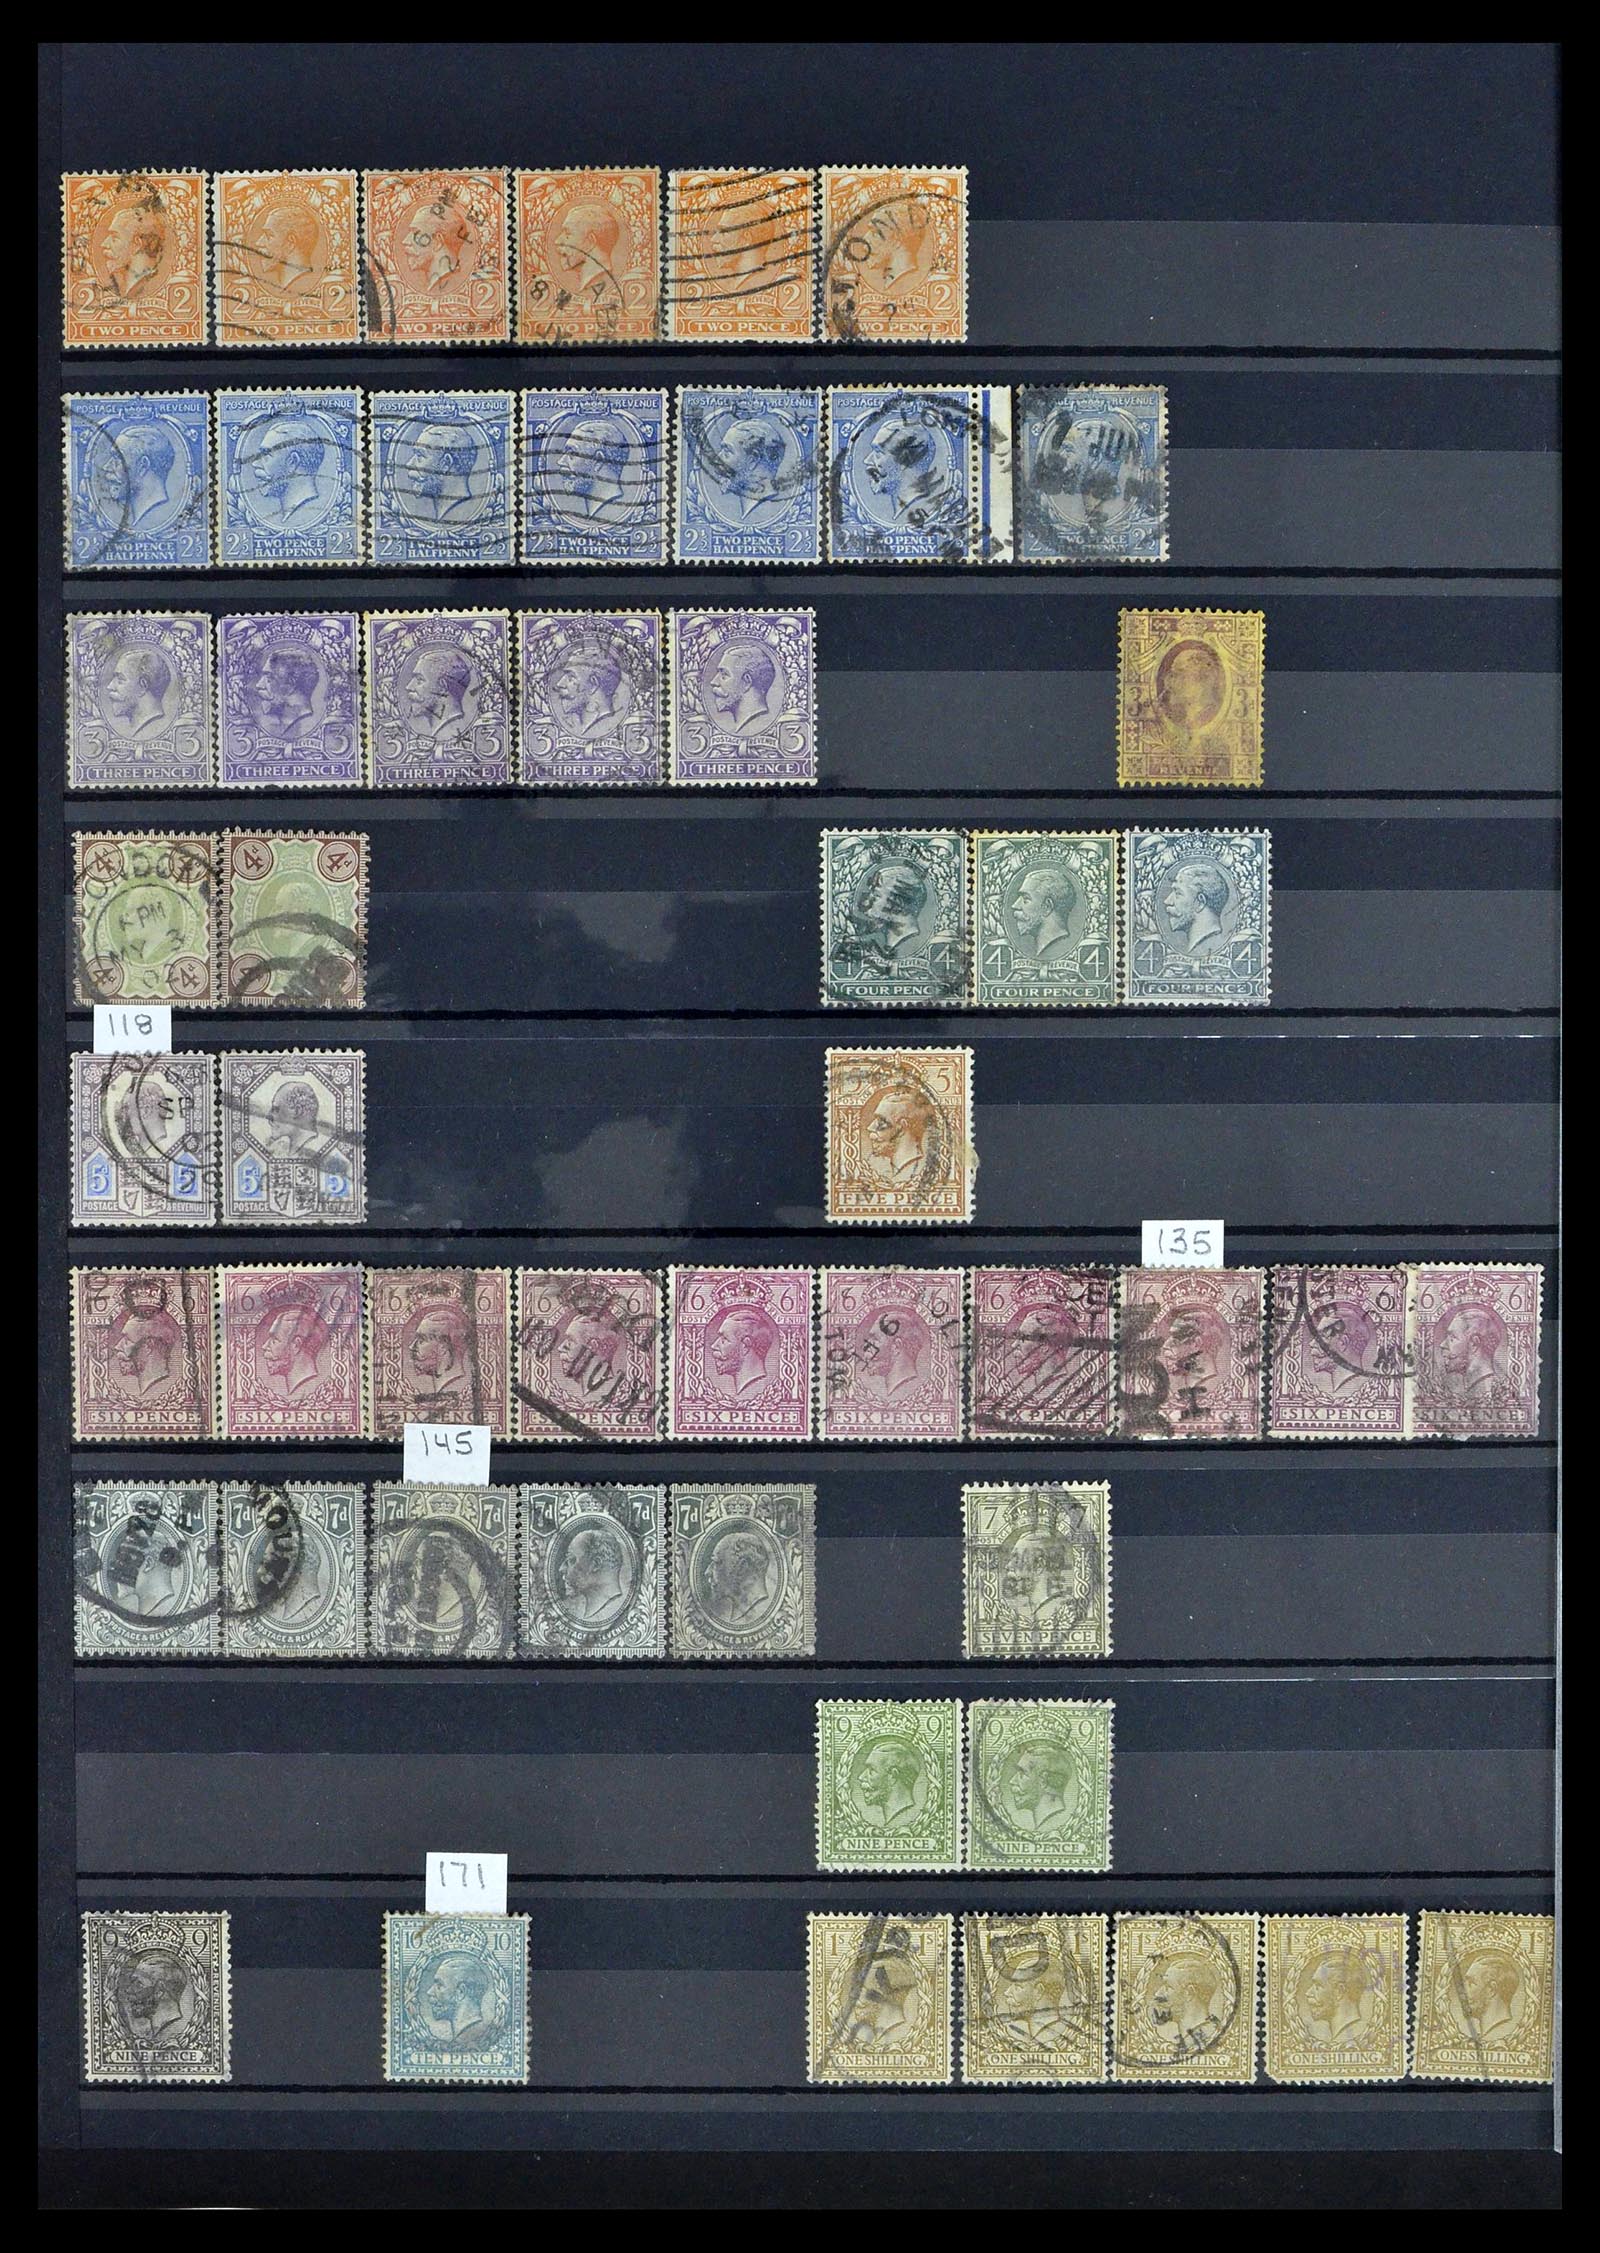 39196 0088 - Stamp collection 39196 Great Britain 1844-1955.